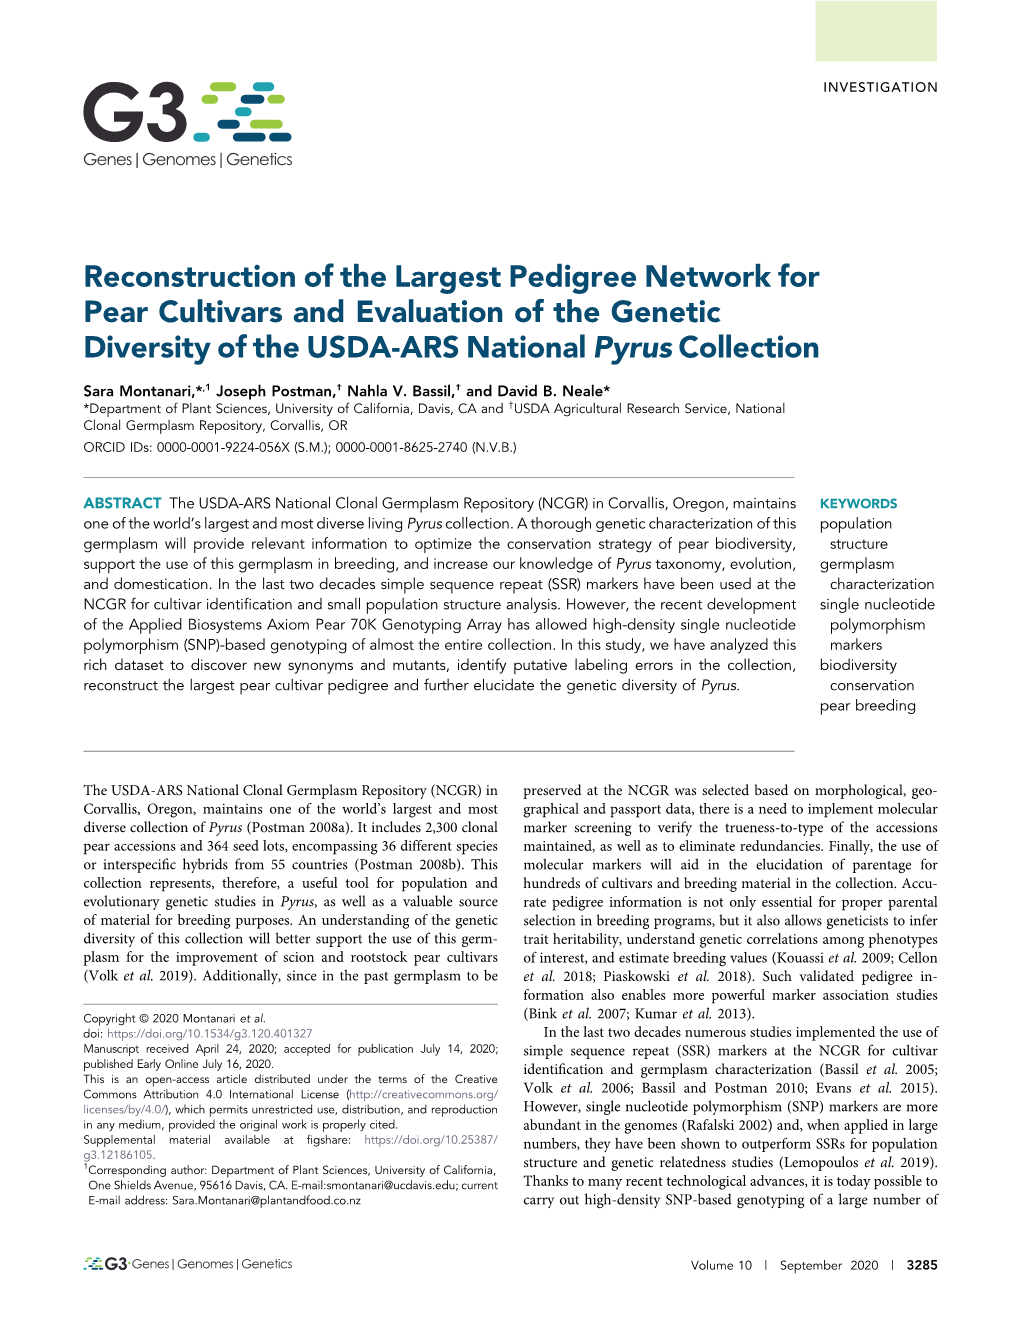 Reconstruction of the Largest Pedigree Network for Pear Cultivars and Evaluation of the Genetic Diversity of the USDA-ARS National Pyrus Collection